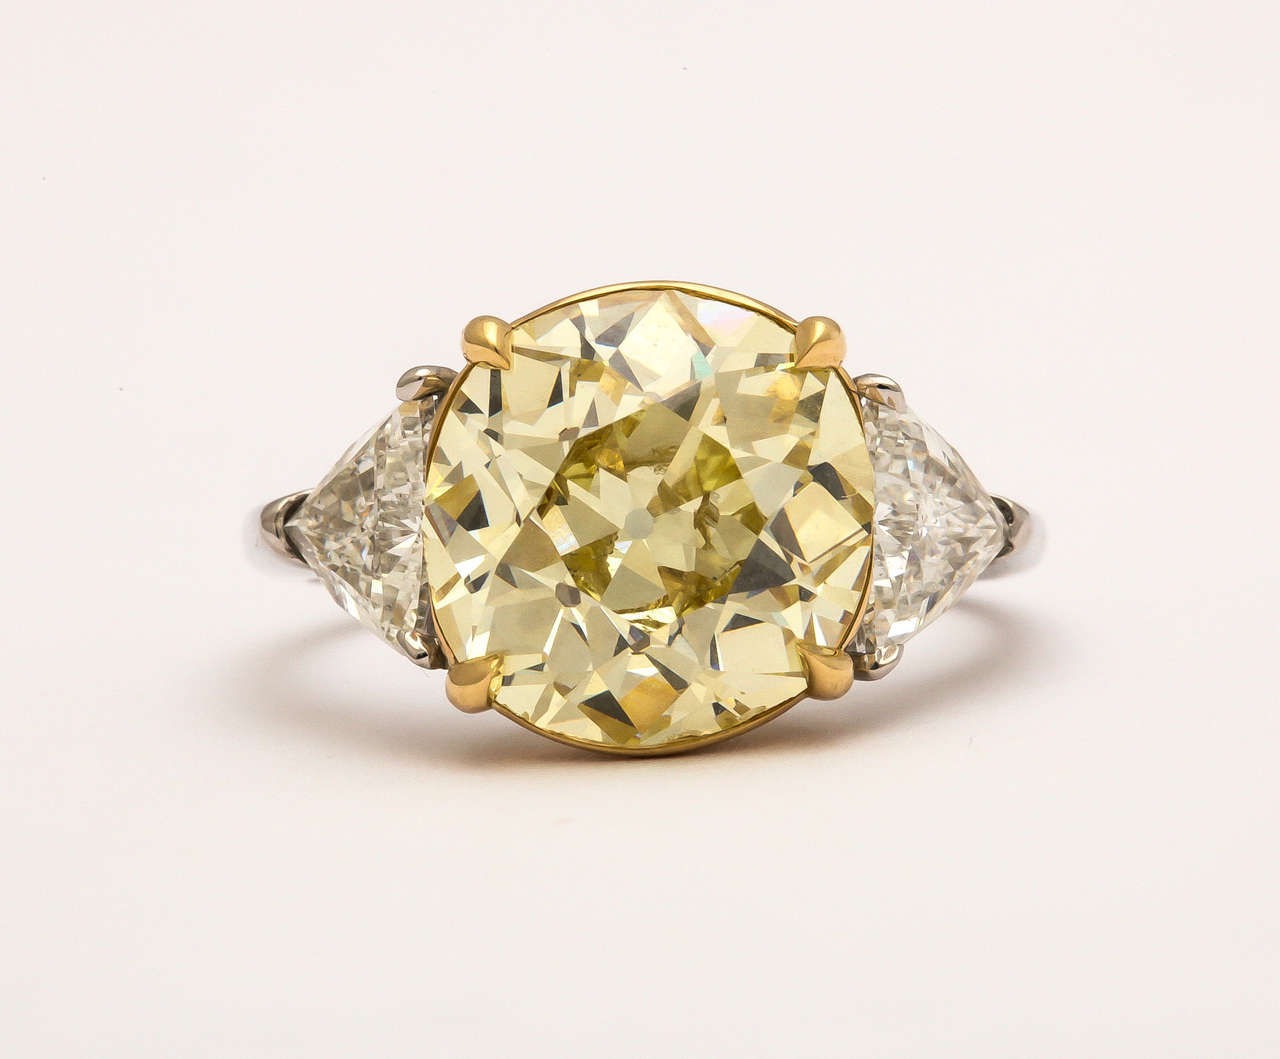 Platinum ring centering an Old Mine Cut diamond 5.22 carats Fancy Yellow and Slightly Imperfect accompanied by GIA report #14566761  flanked by 2 colorless triangle diamonds 1.20 carats